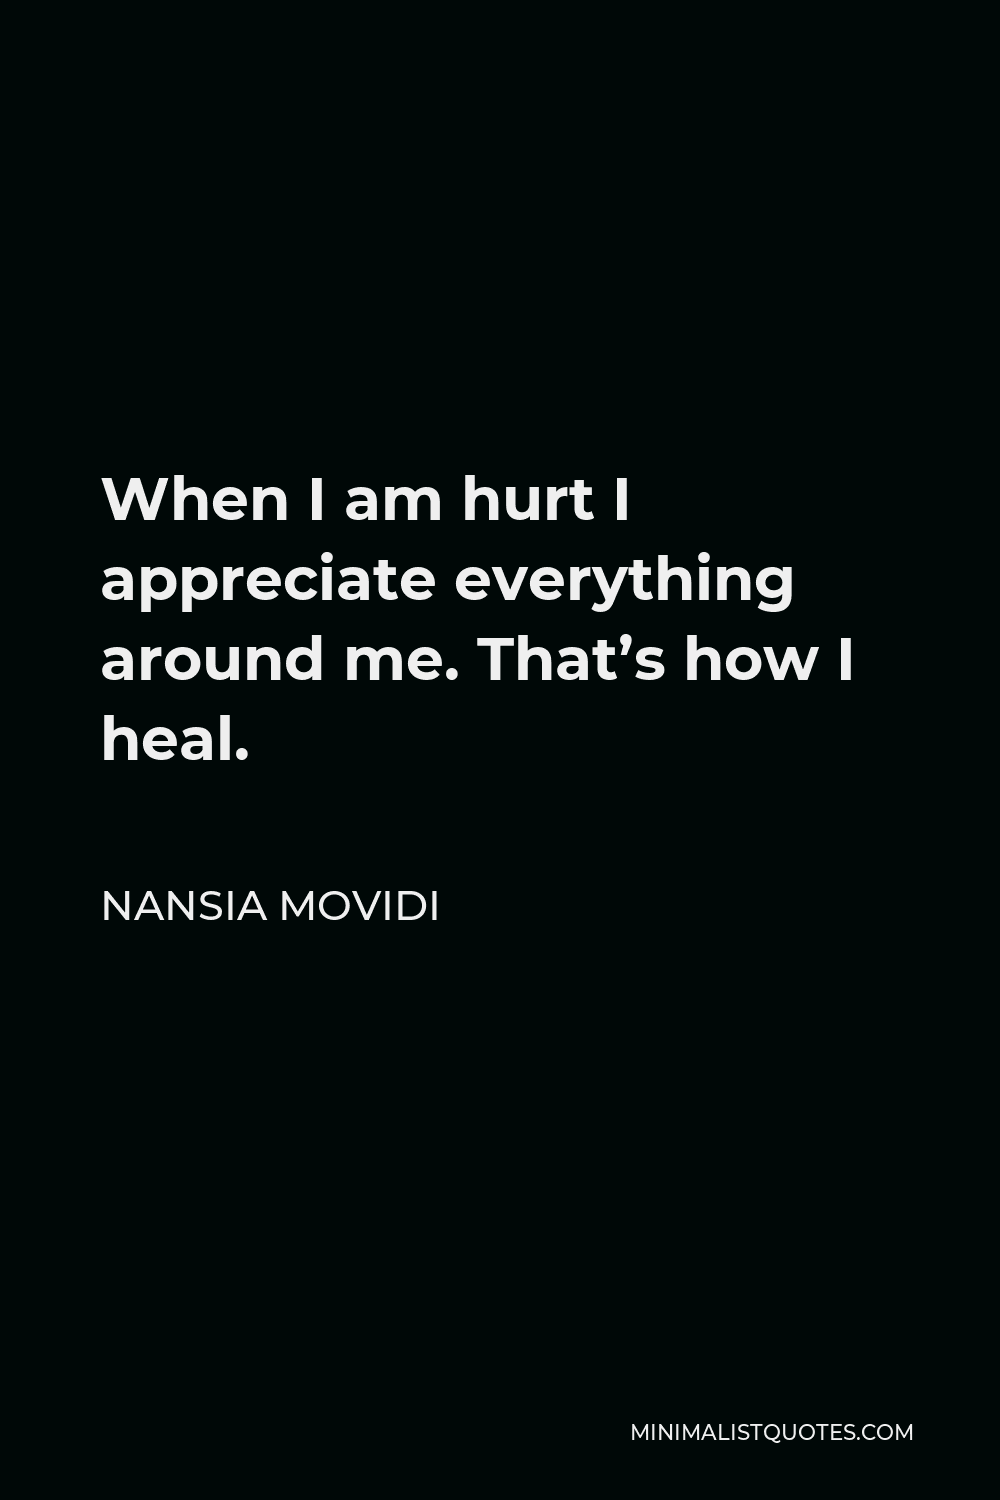 Nansia Movidi Quote - When I am hurt I appreciate everything around me. That’s how I heal.